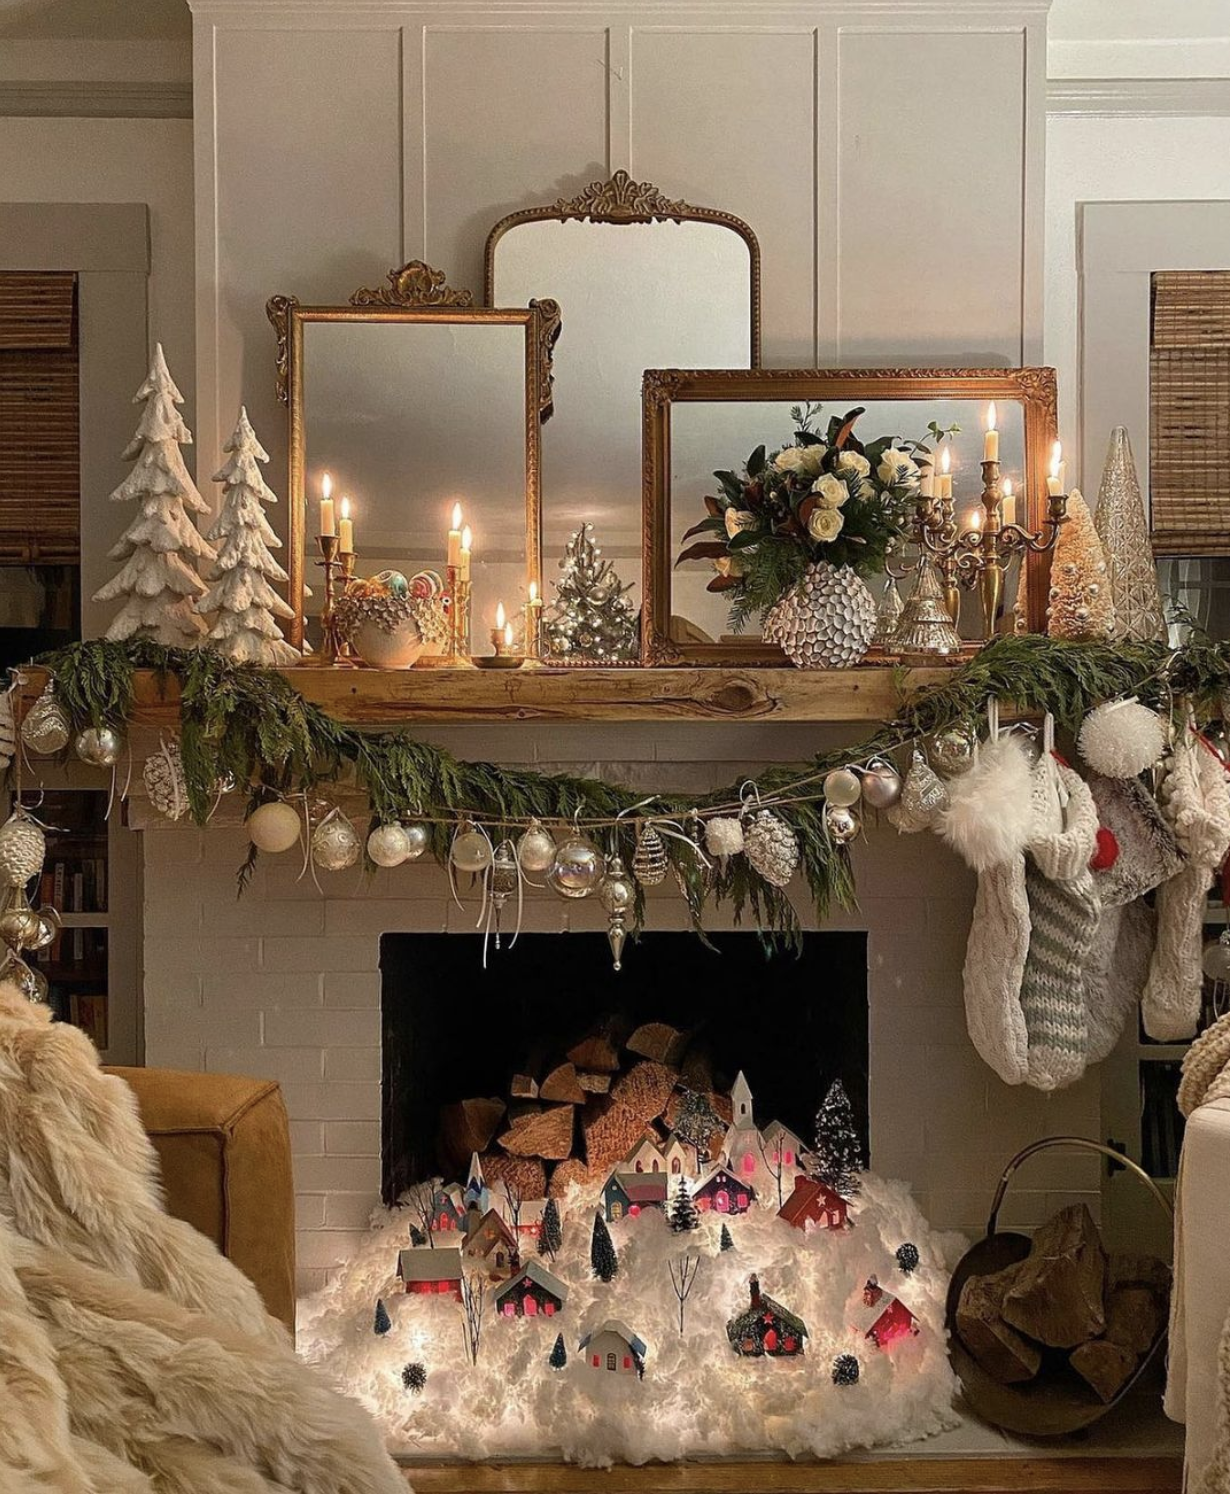 12 Creative Christmas Decorating Ideas from Here to the North Pole ...